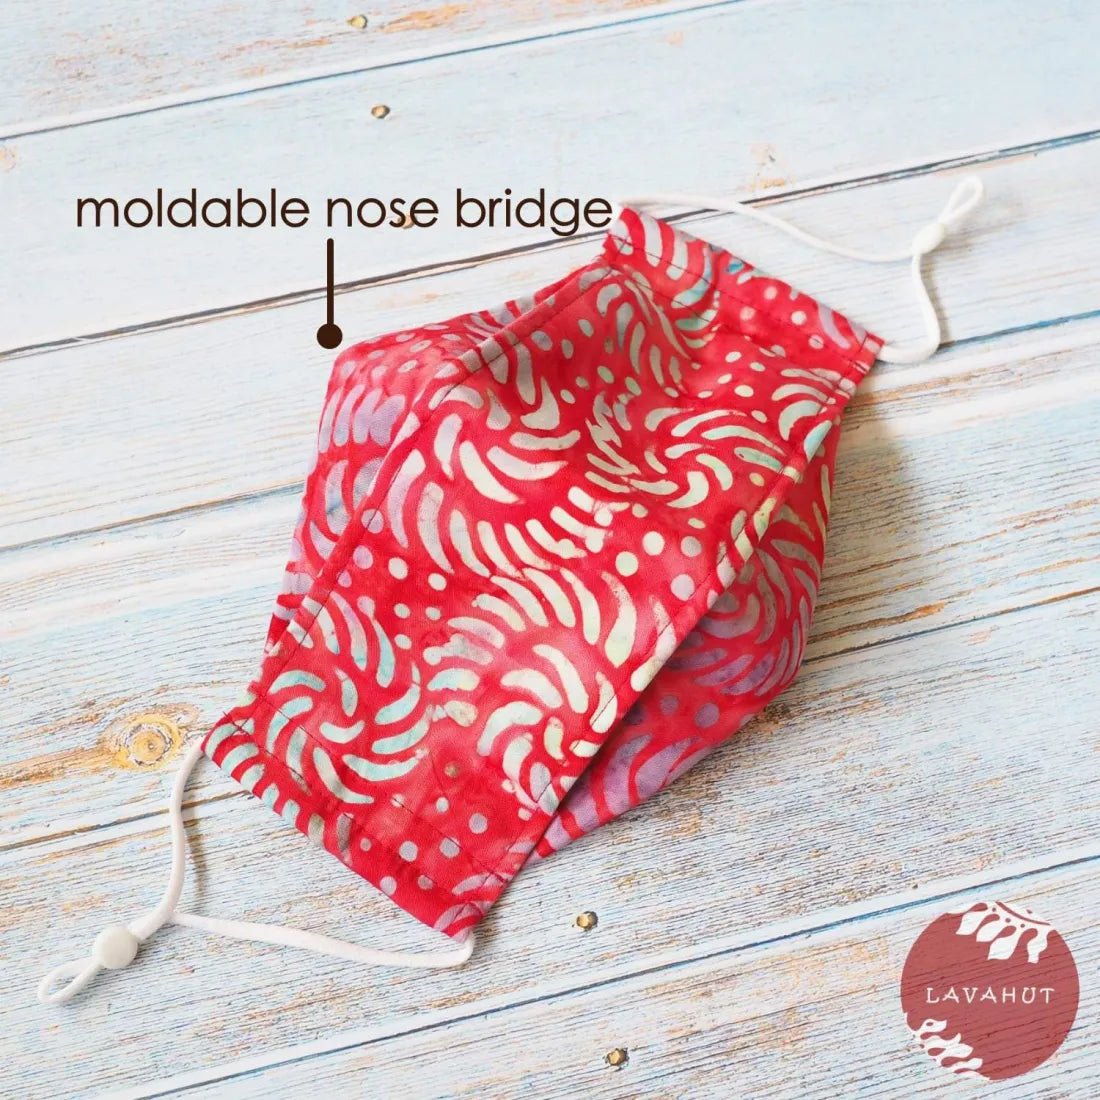 Antimicrobial Silvadur™ + Origami 3d Face Mask • Red Kilauea - Made In Hawaii